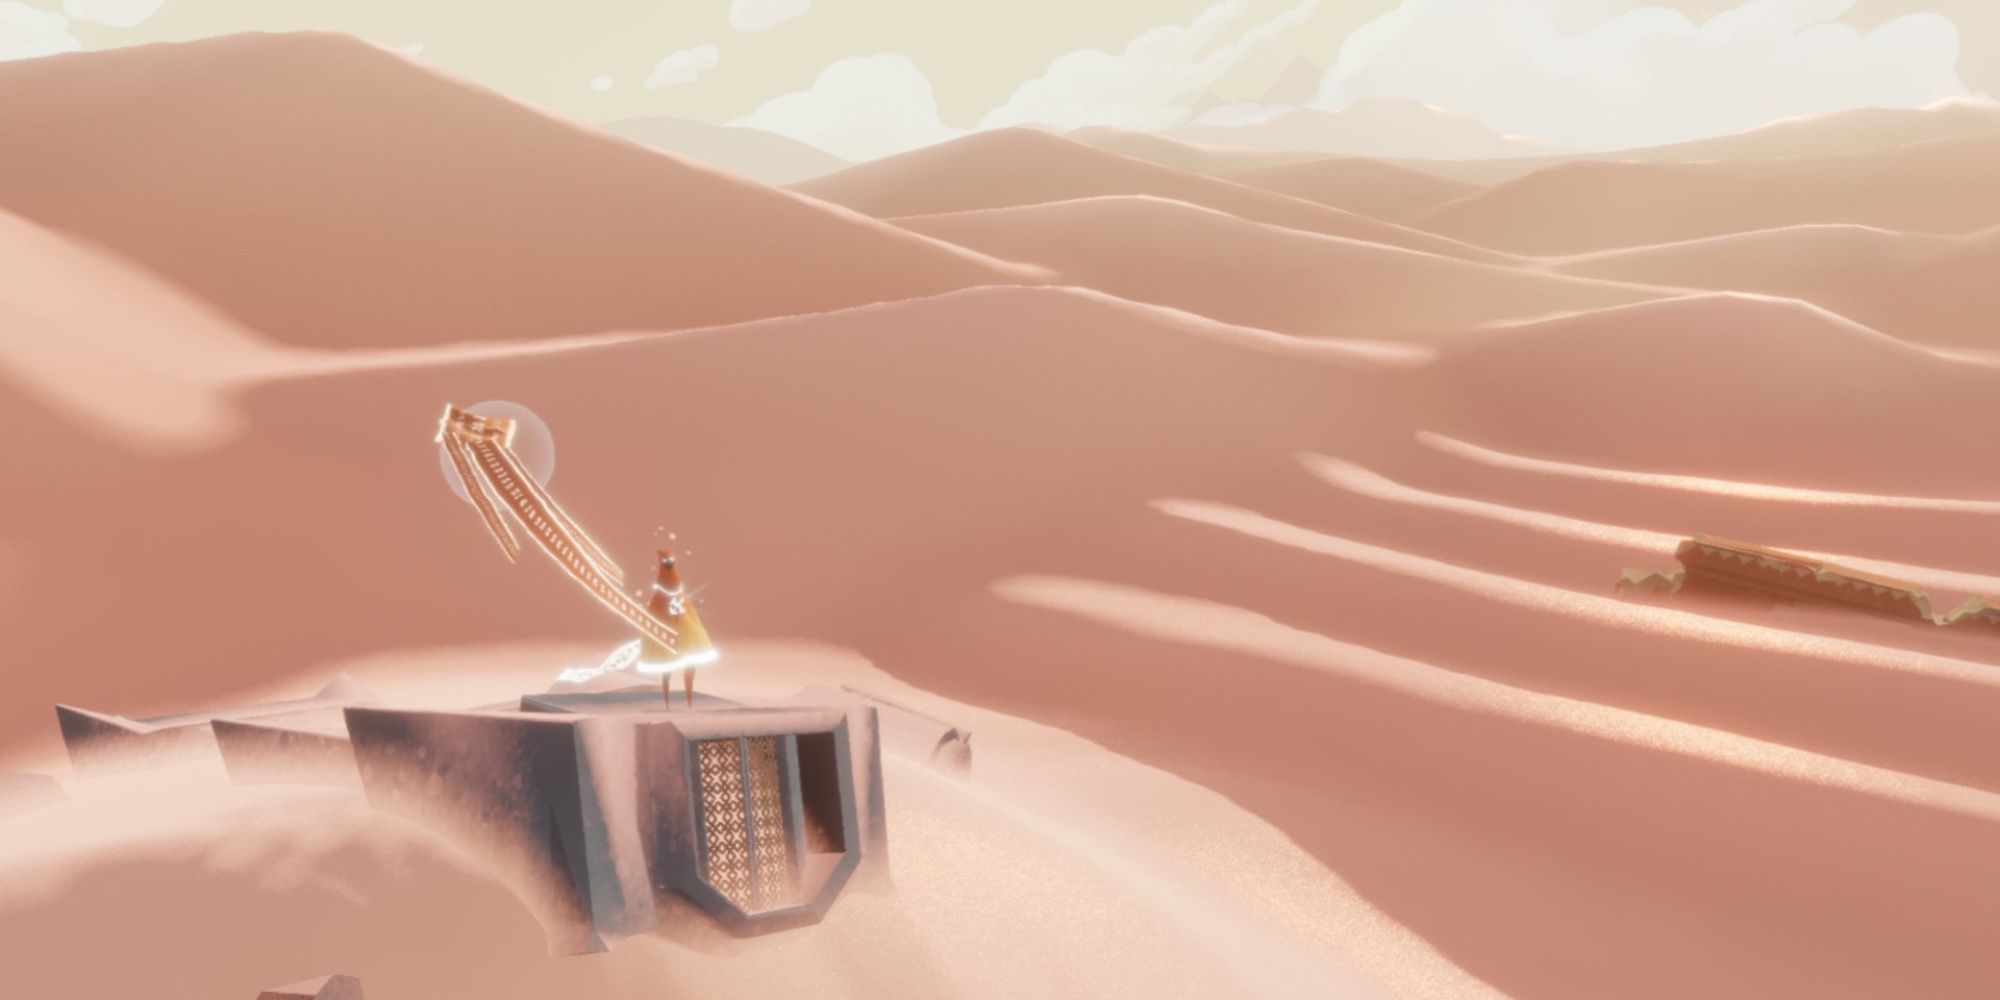 Journey: The Traveler in the middle of a desert